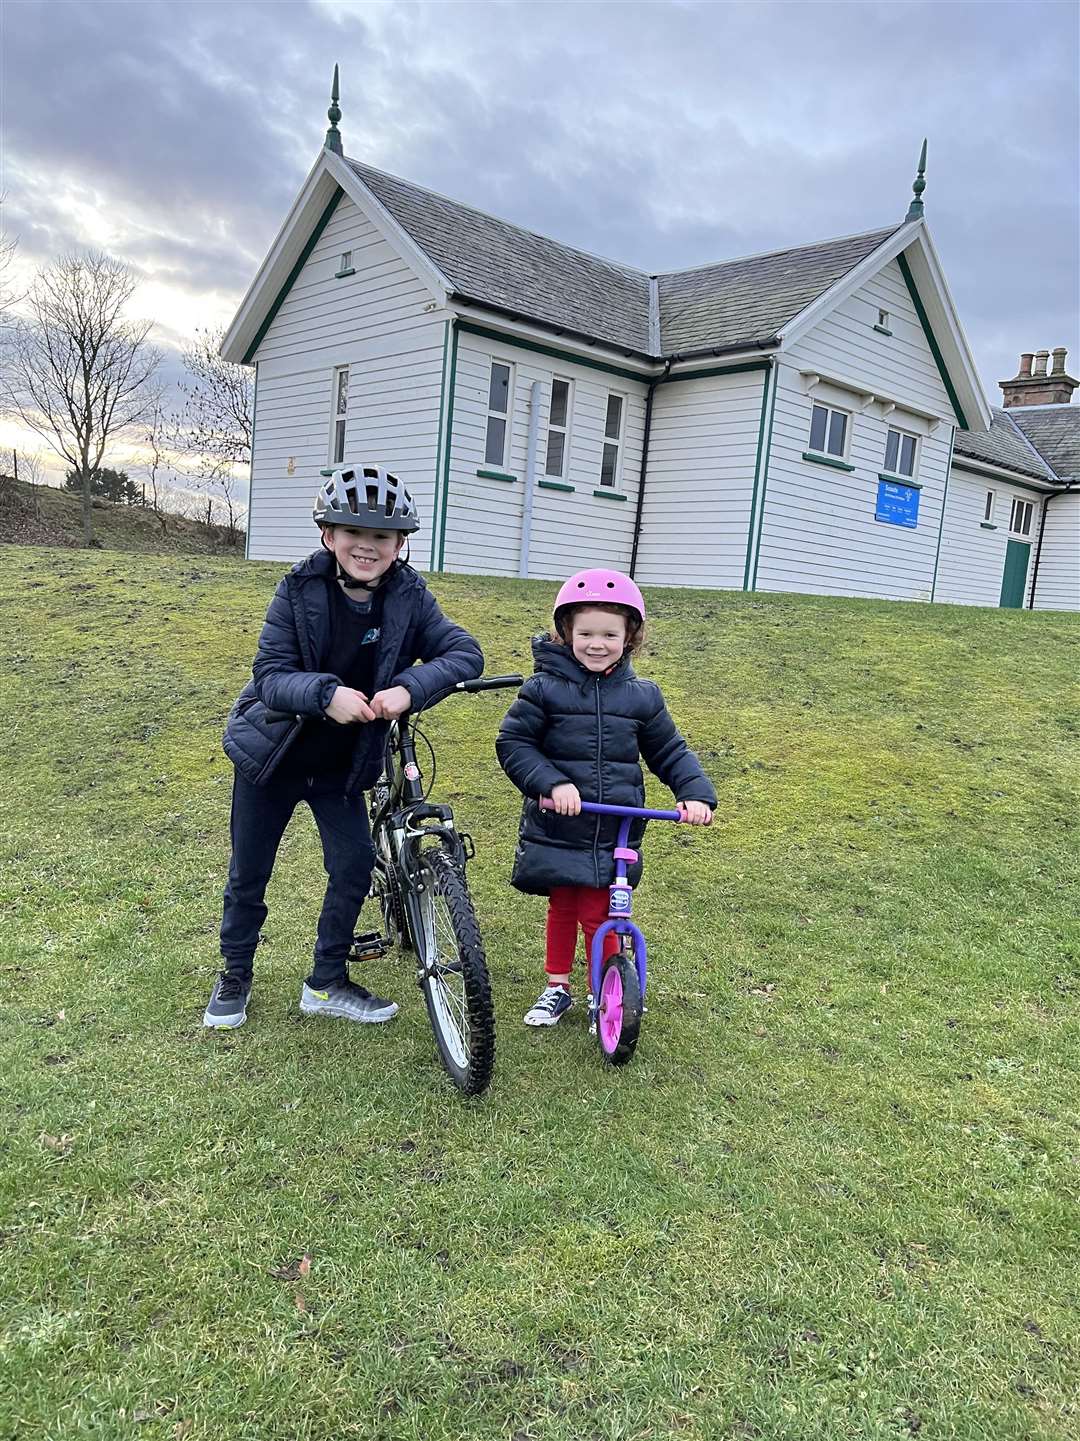 Cammy with his sister Macey on their bikes.